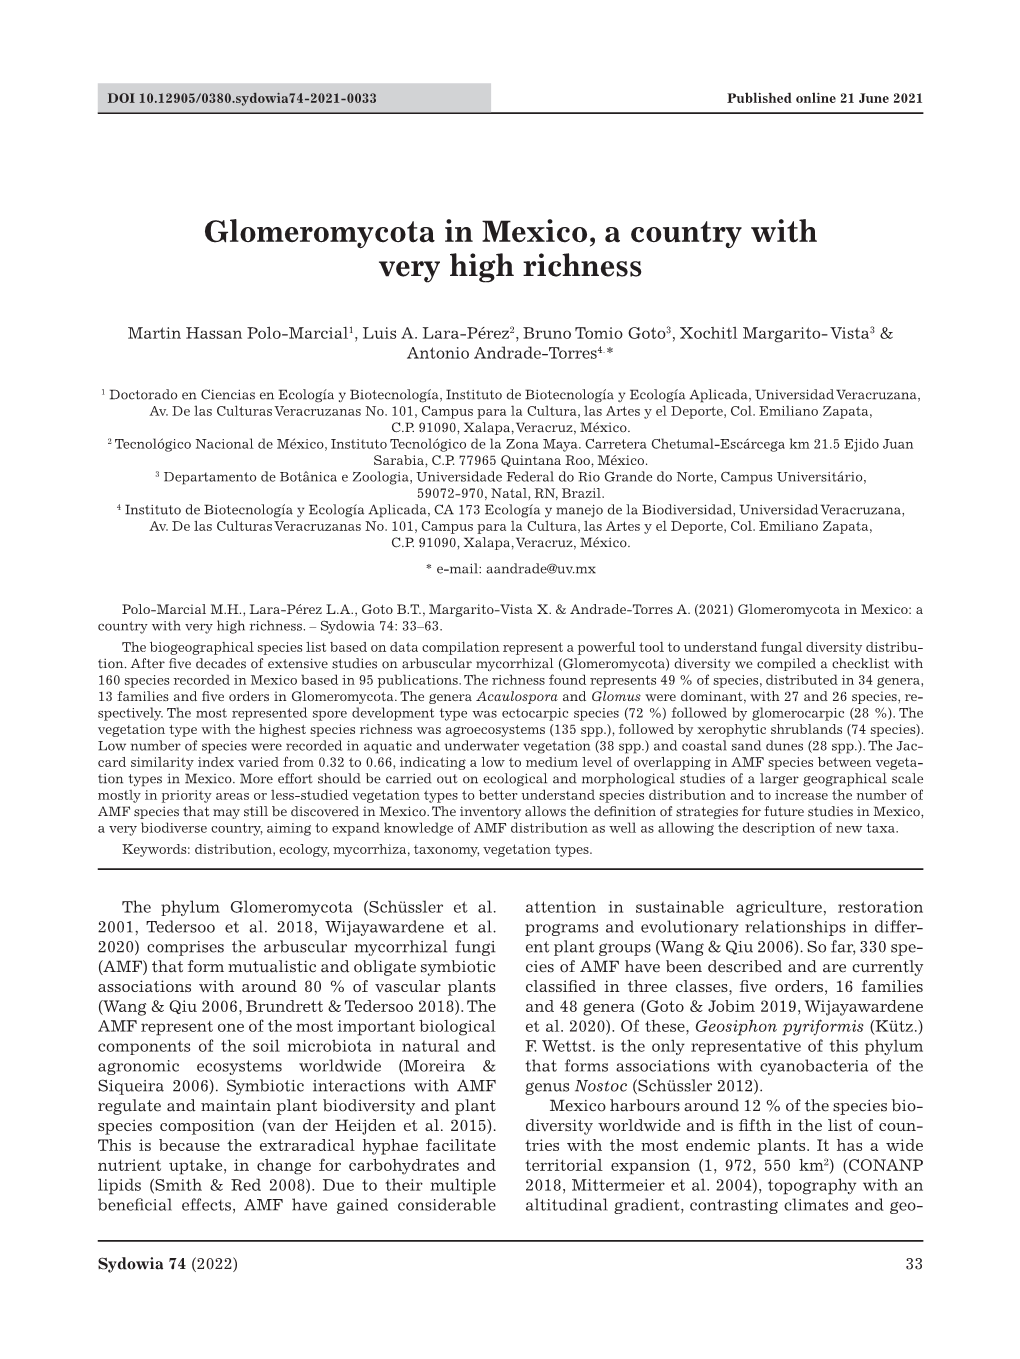 Glomeromycota in Mexico, a Country with Very High Richness